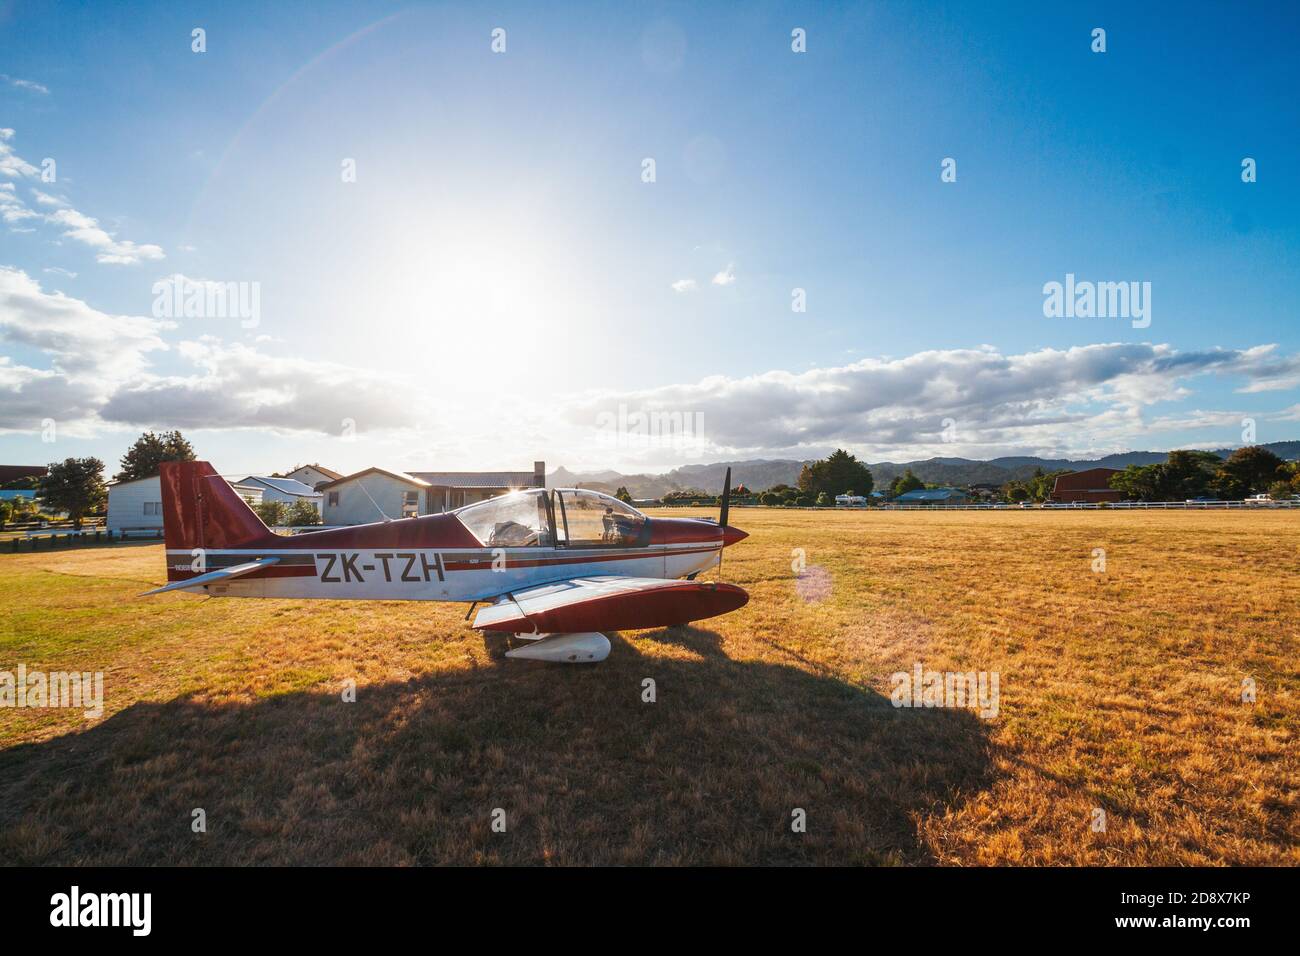 a Robin 2120 two-seater light aircraft sits parked on the grass at Pauanui Airfield, Coromandel, New Zealand as the summer sun sets Stock Photo